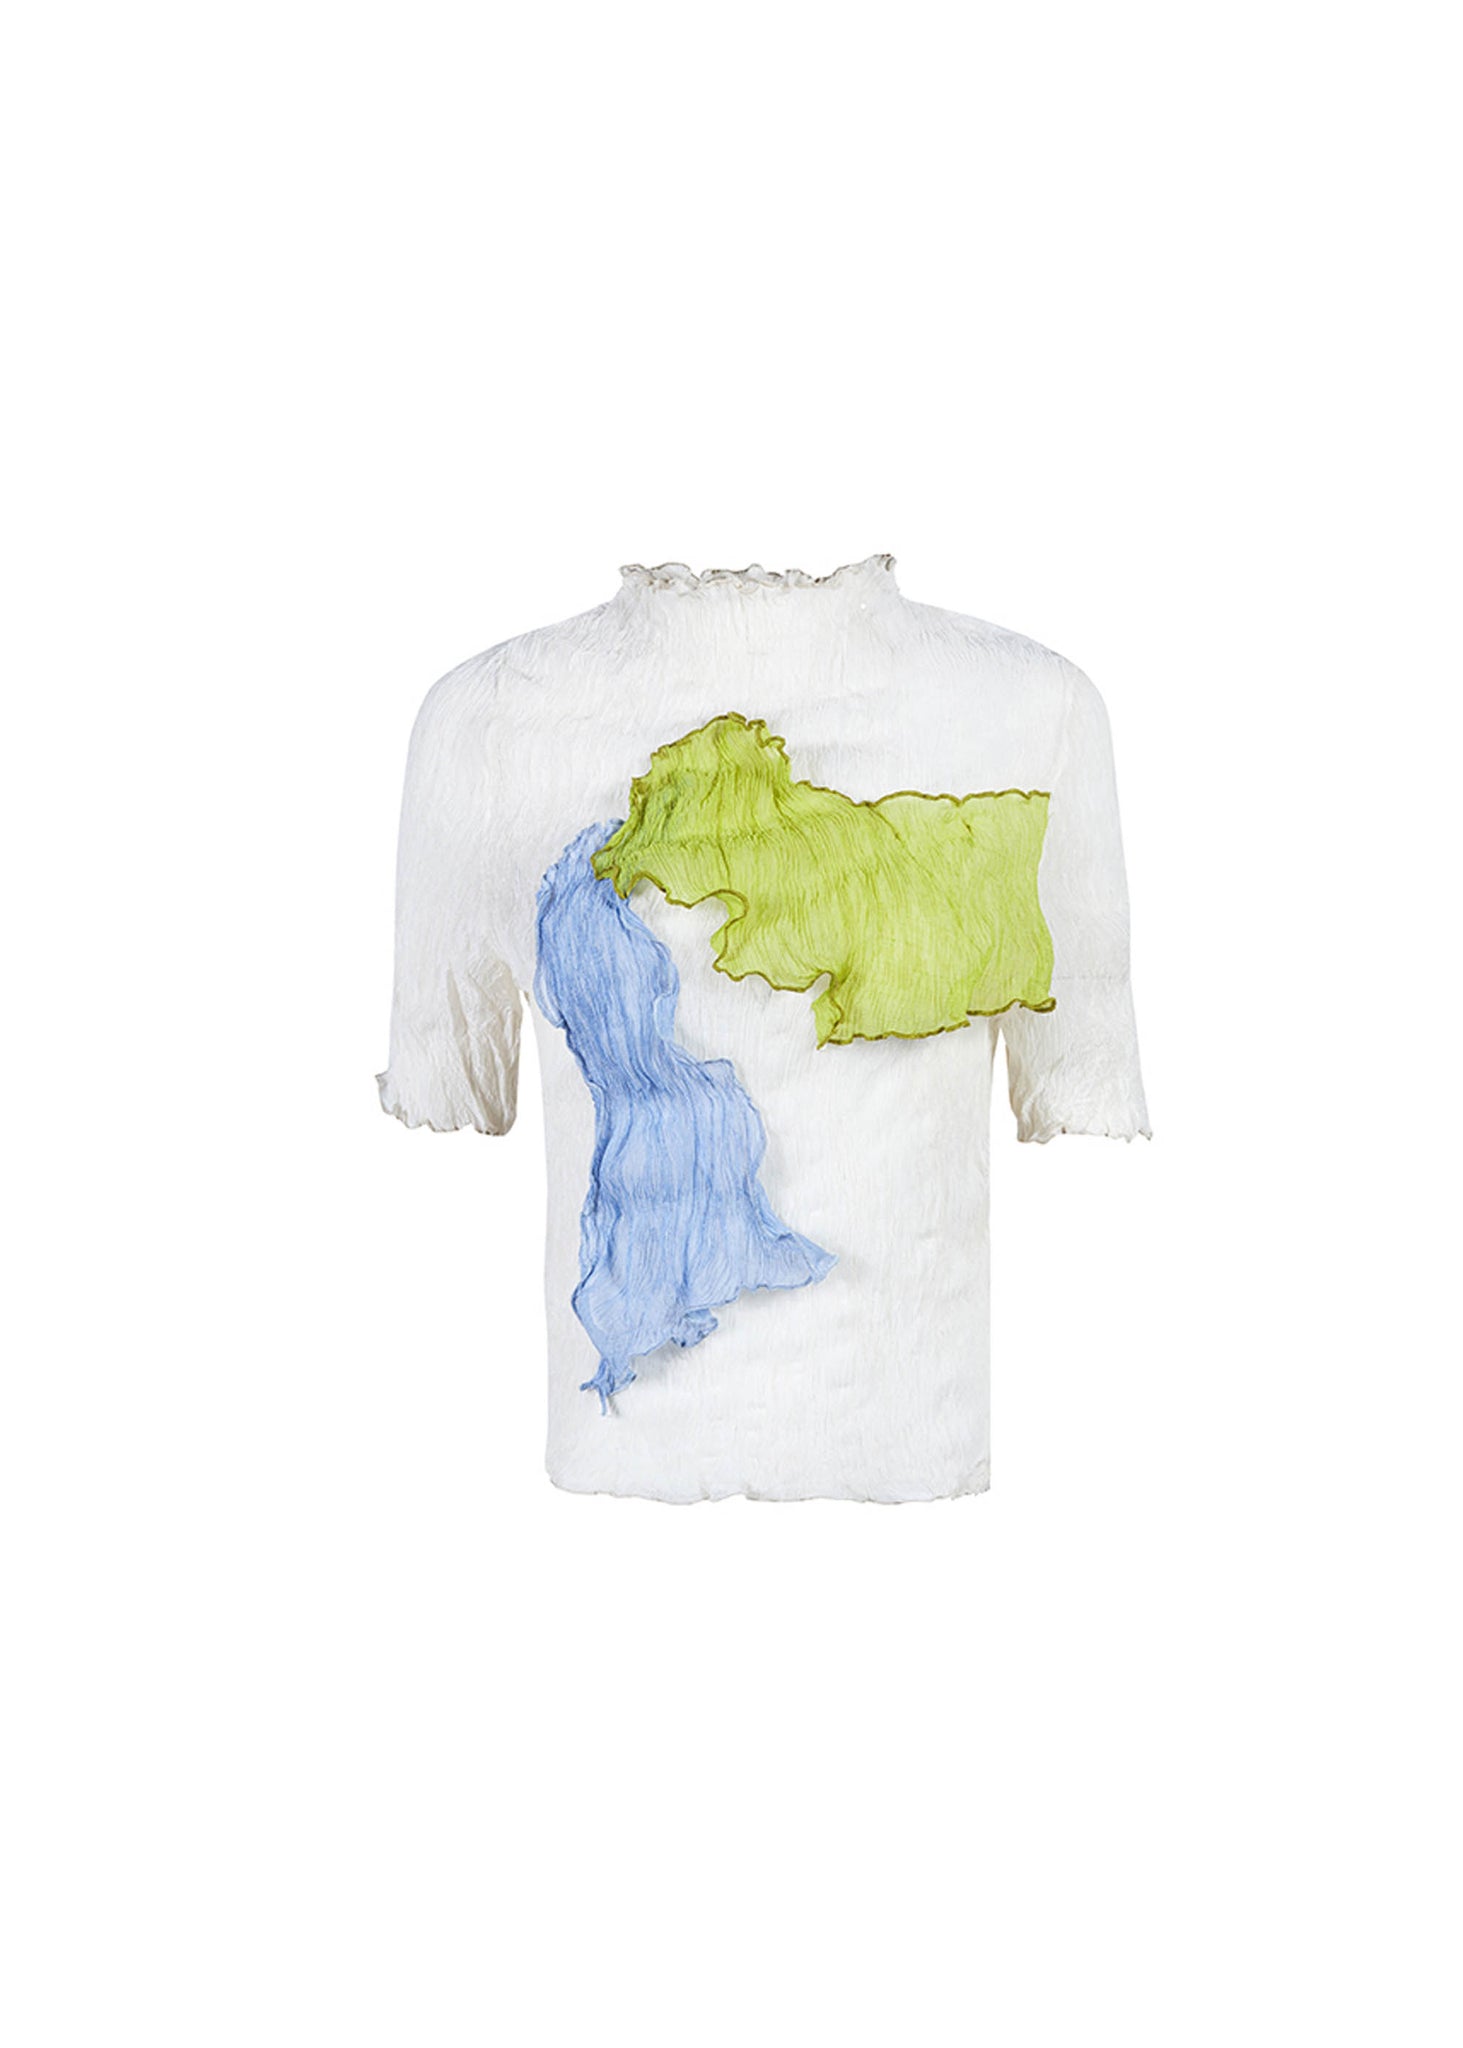 White & Green Patchwork T-Shirt - 157Moments